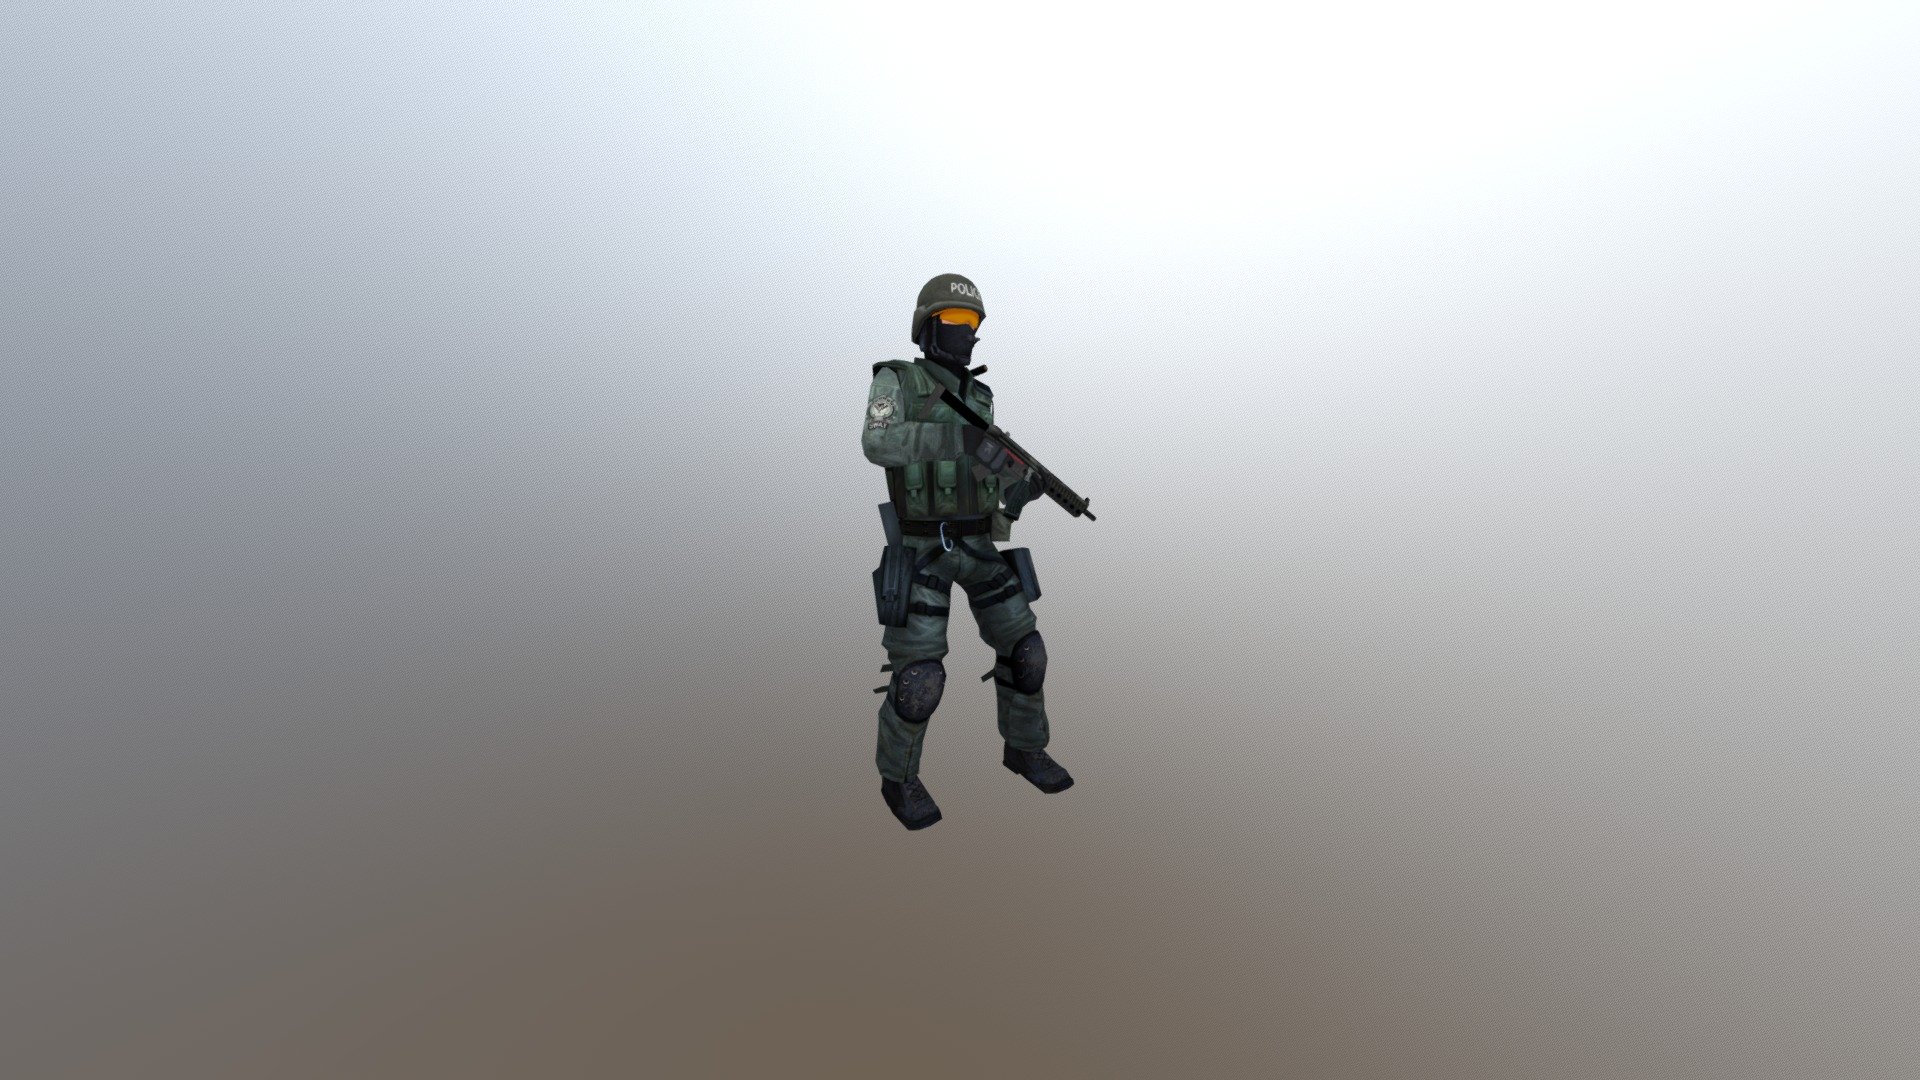 Megapack of 139 quality Rifle police animations with a gun to create your own marvellous brand new RPG /FPS/Simulations or any genre of game. 
 Gun Animations, Reloads, Crouches Fight, deaths, talks, runs, walks, listening animations for covering all of your needs. 
 Animation Frame Range Excel Spreadsheet with Frame Ranges:
 https://www.dropbox.com/s/fuh7uz6c73oncif/S.W.A.T_Animations.xlsx?dl=0 
 You can watch video presentation for full breakdown of all animations. 
 Contact arjun@appymonkeys.com for feedback 3d model